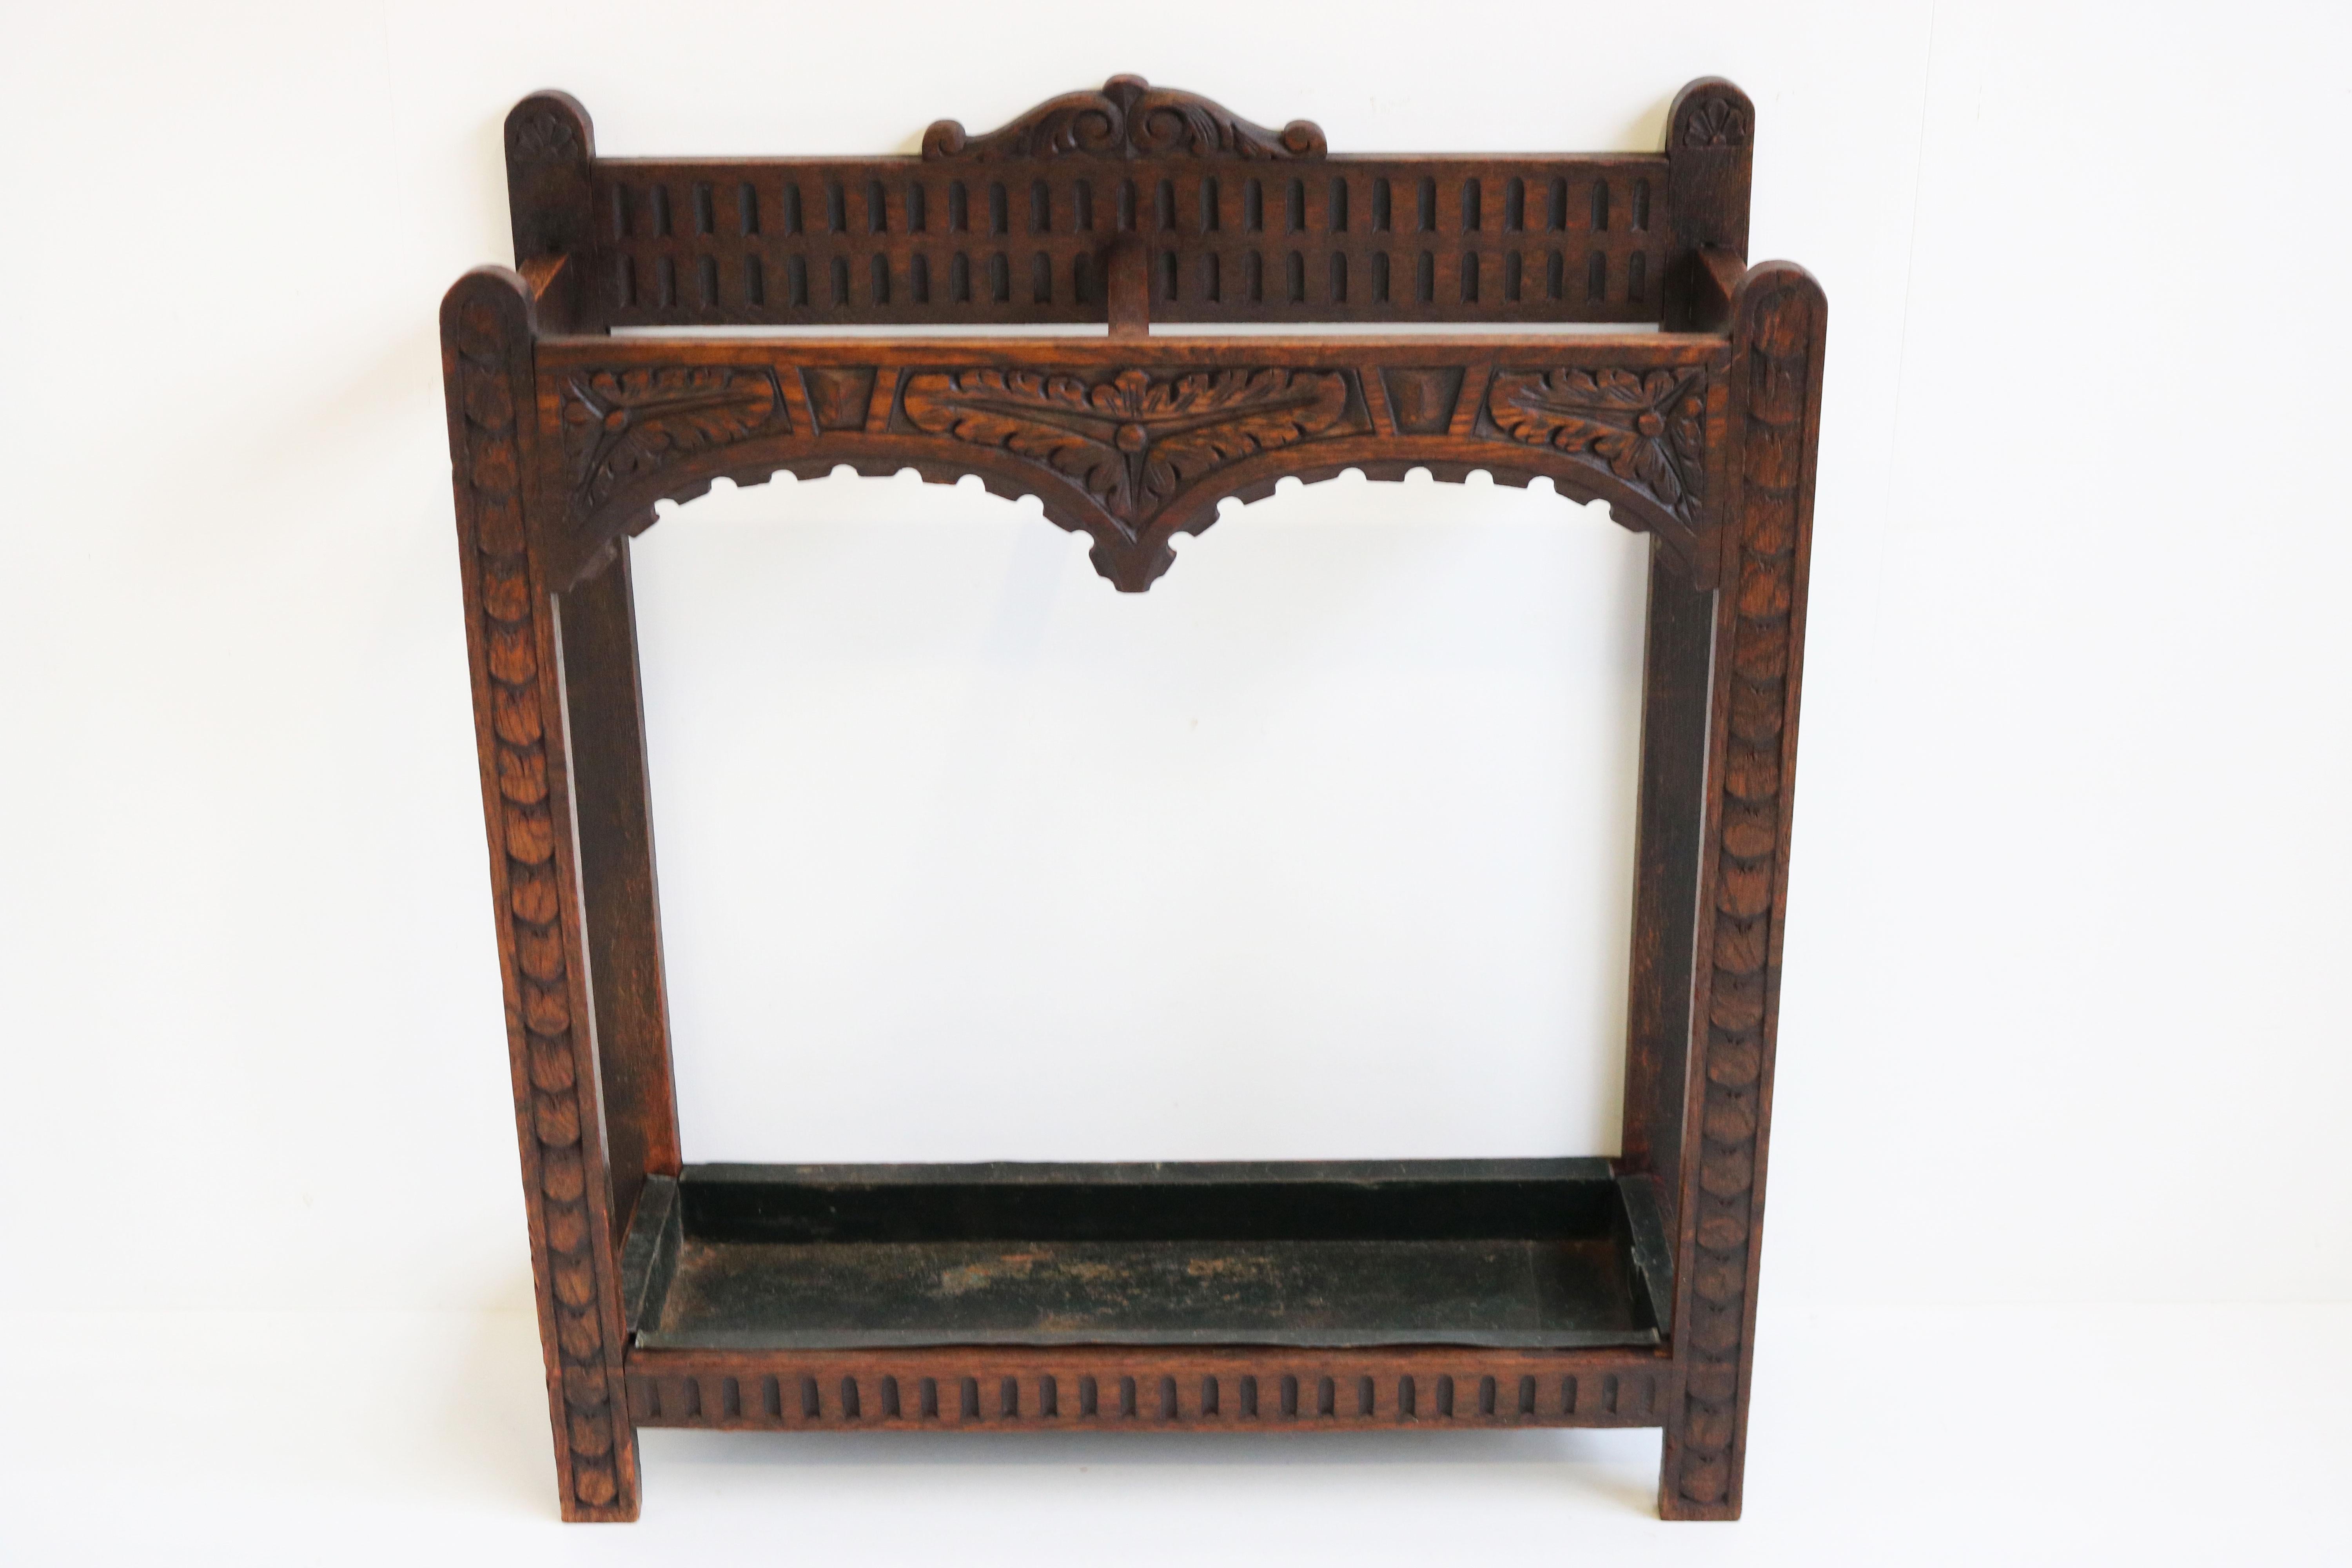 Carved Antique 19th Century French Renaissance Revival Umbrella Stand / Stick Holder For Sale